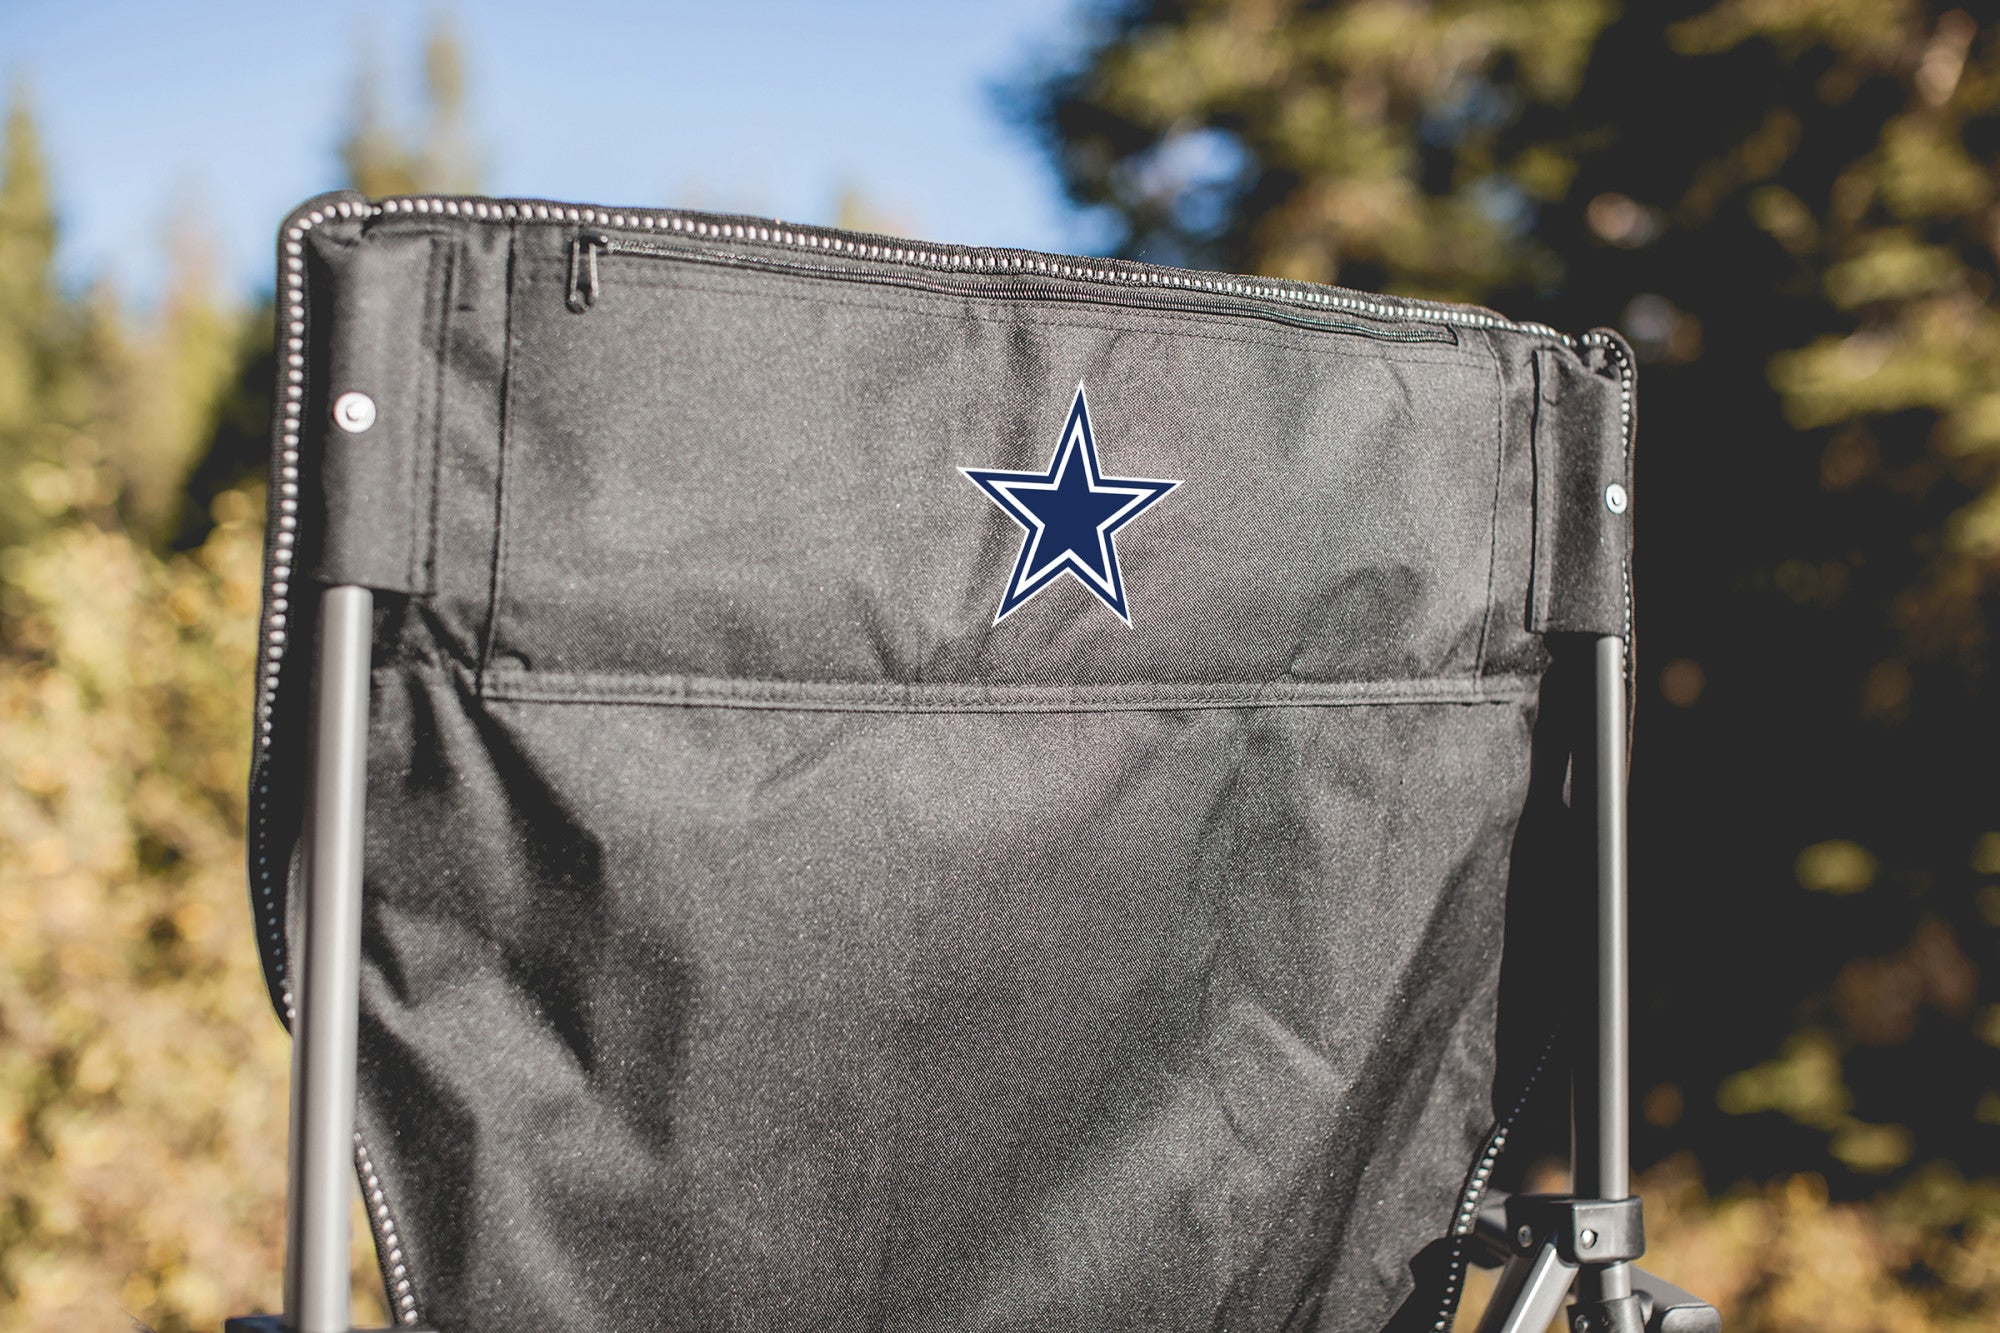 Dallas Cowboys - Big Bear XXL Camping Chair with Cooler